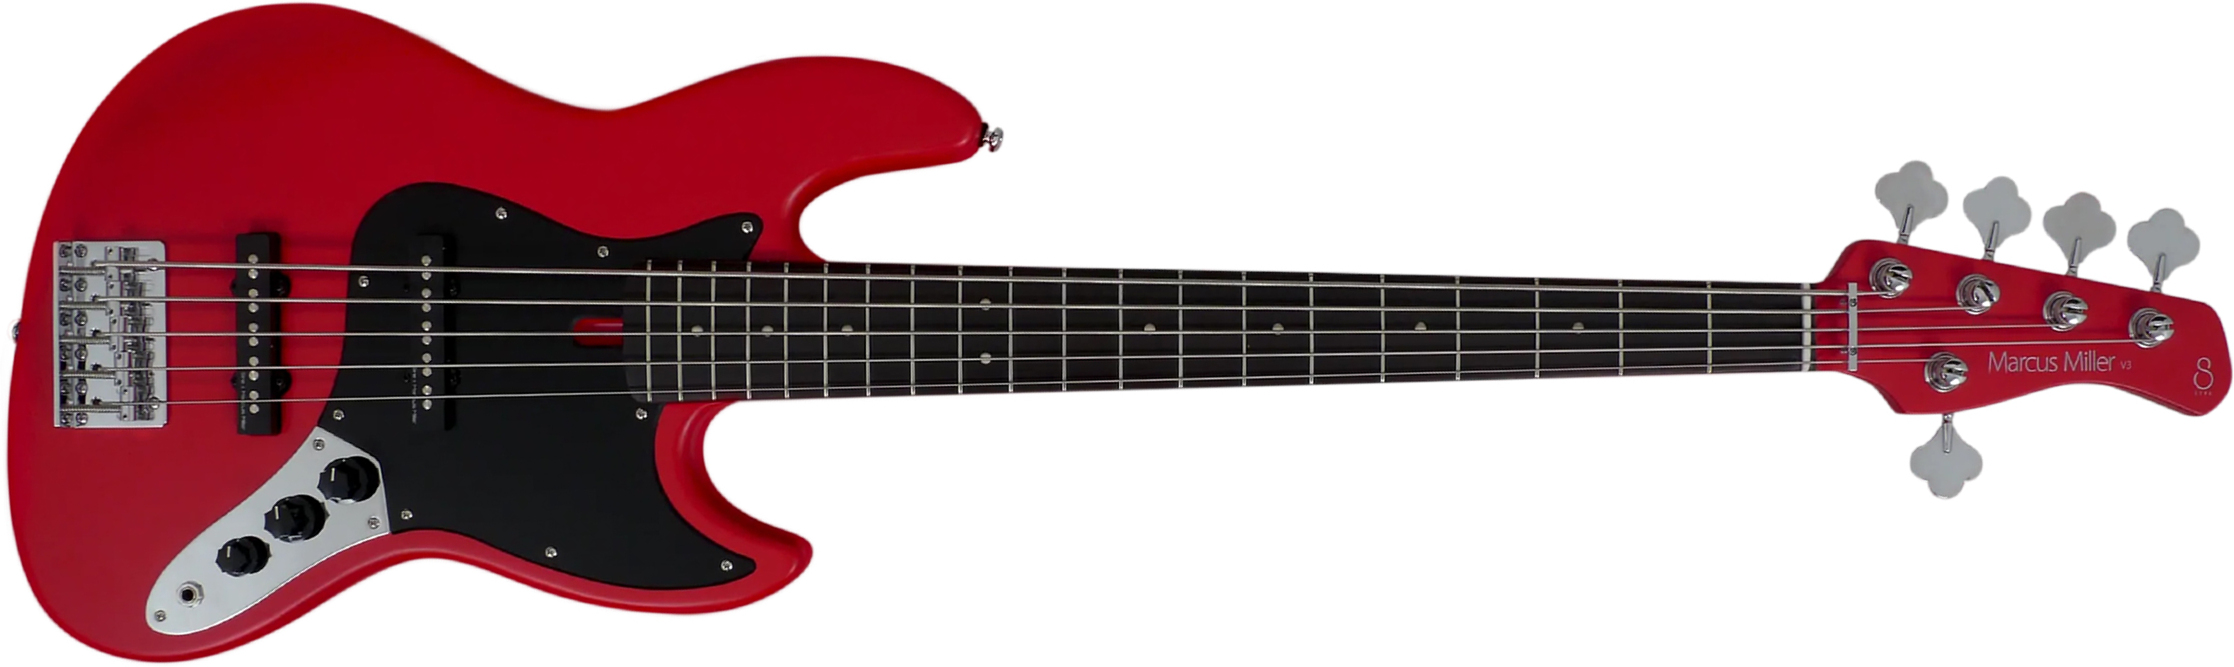 Marcus Miller V3p 5st 5c Rw - Red Satin - Solid body electric bass - Main picture